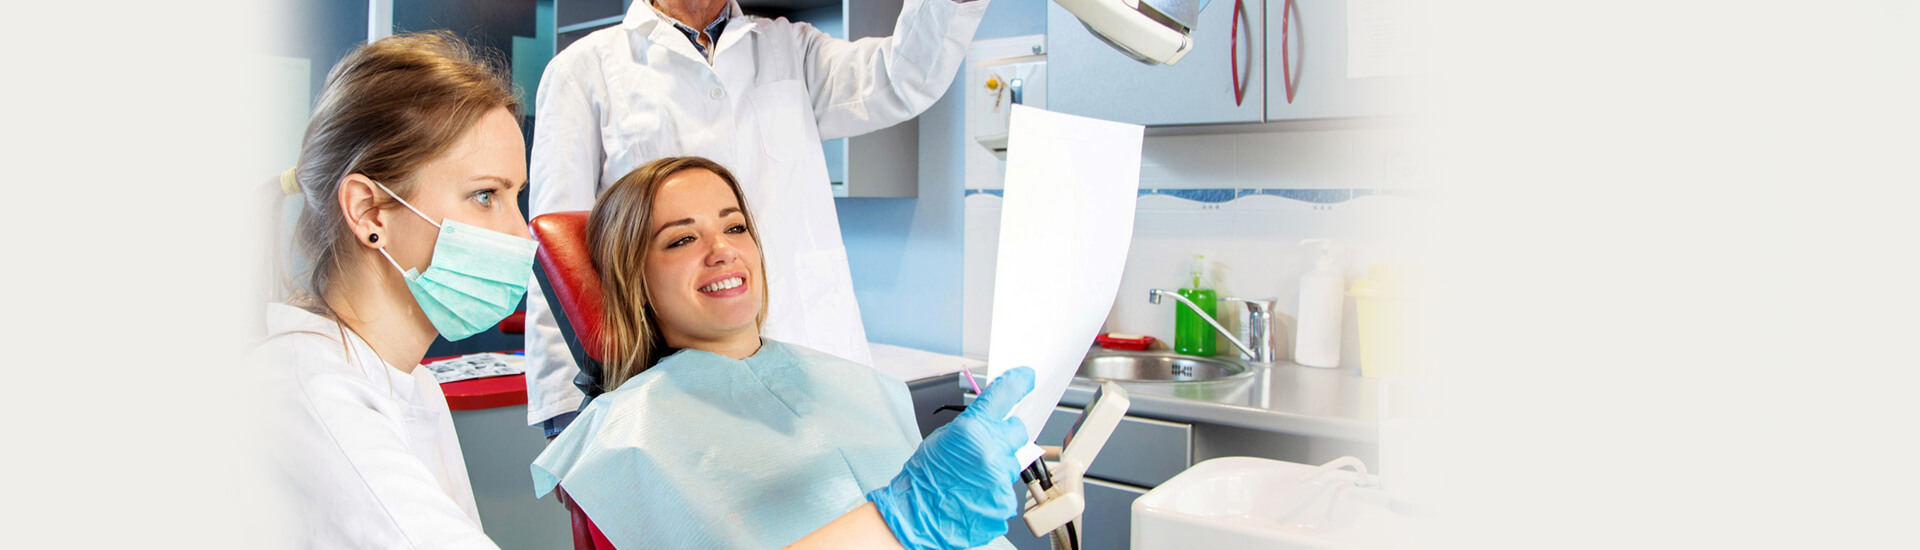 $150 New Patient Exams, Full Mouth Xrays & Healthy Mouth Cleaning.